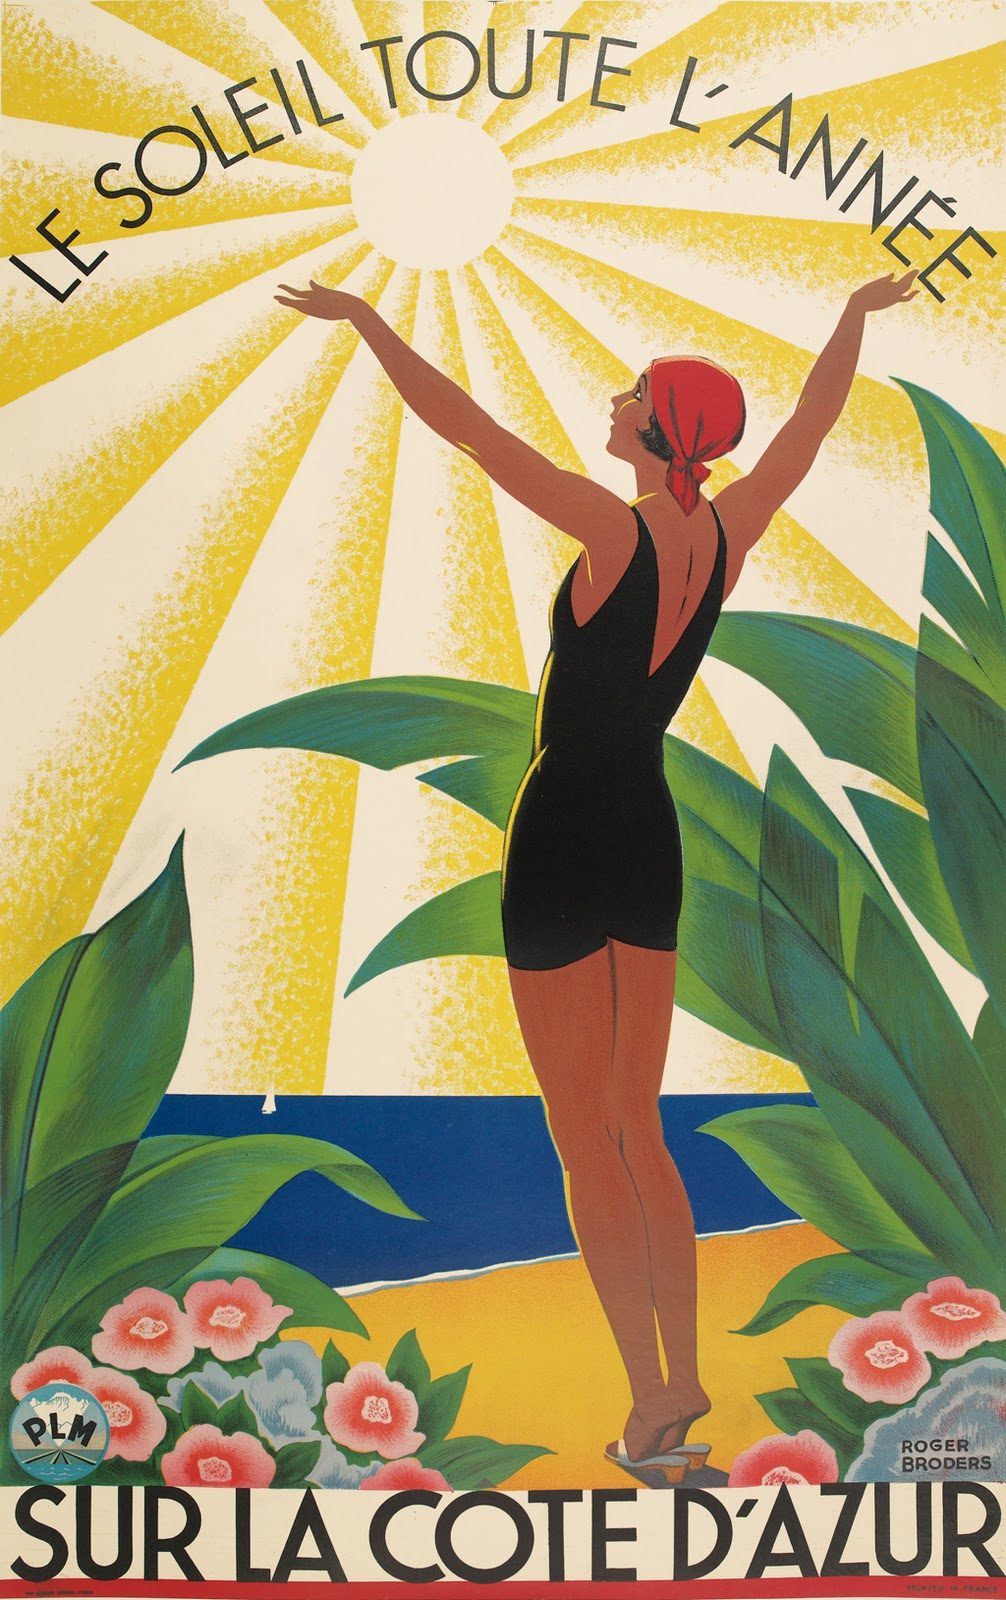 The Sun All Year : On the Côte d’Azur (1931).